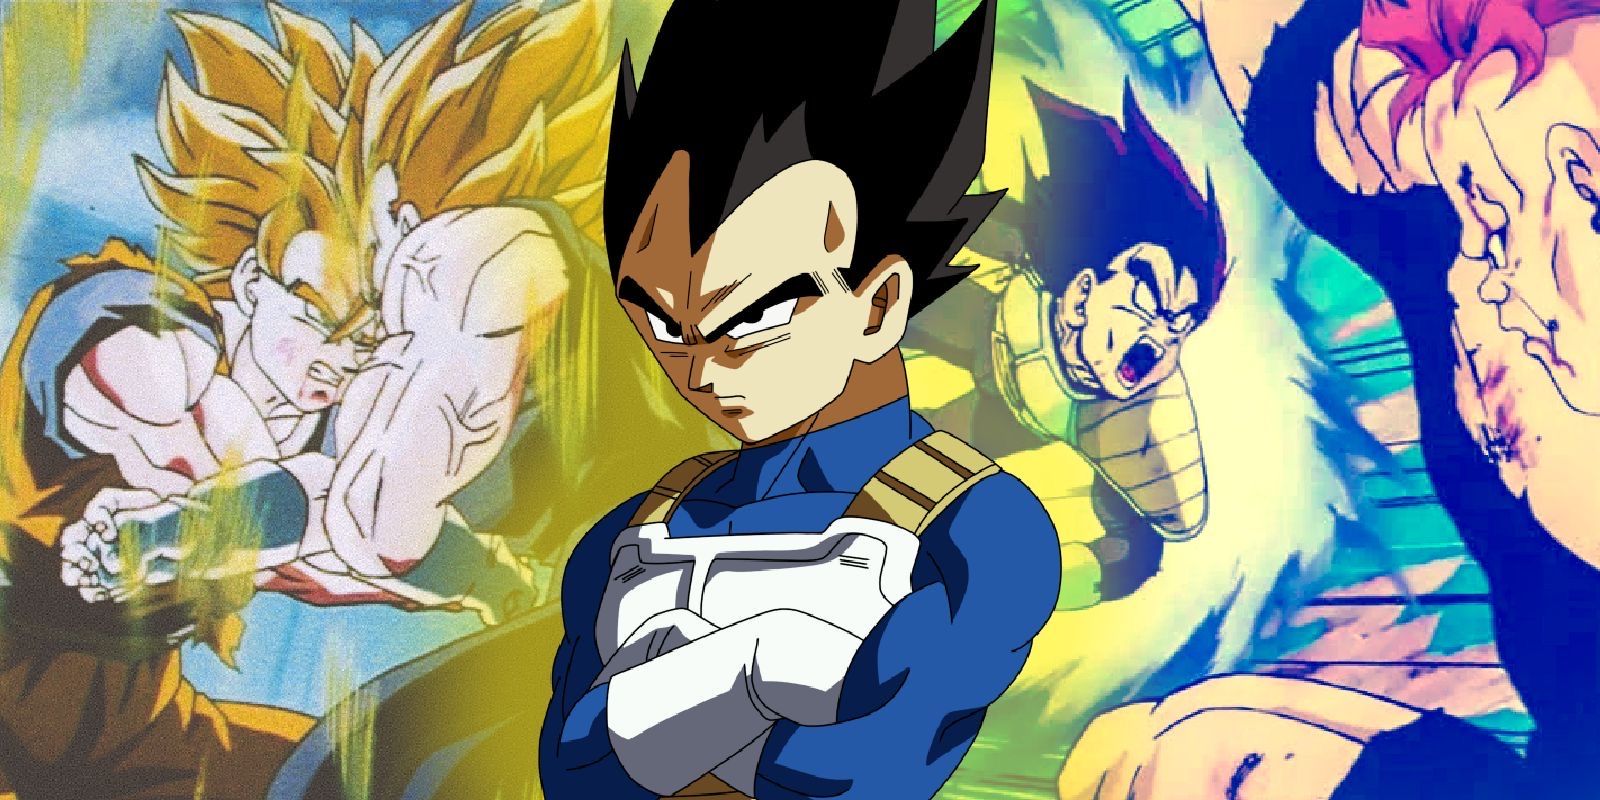 Vegeta fighting Goku as a Majin and Recoome of the Ginyu Force in Dragon Ball Z